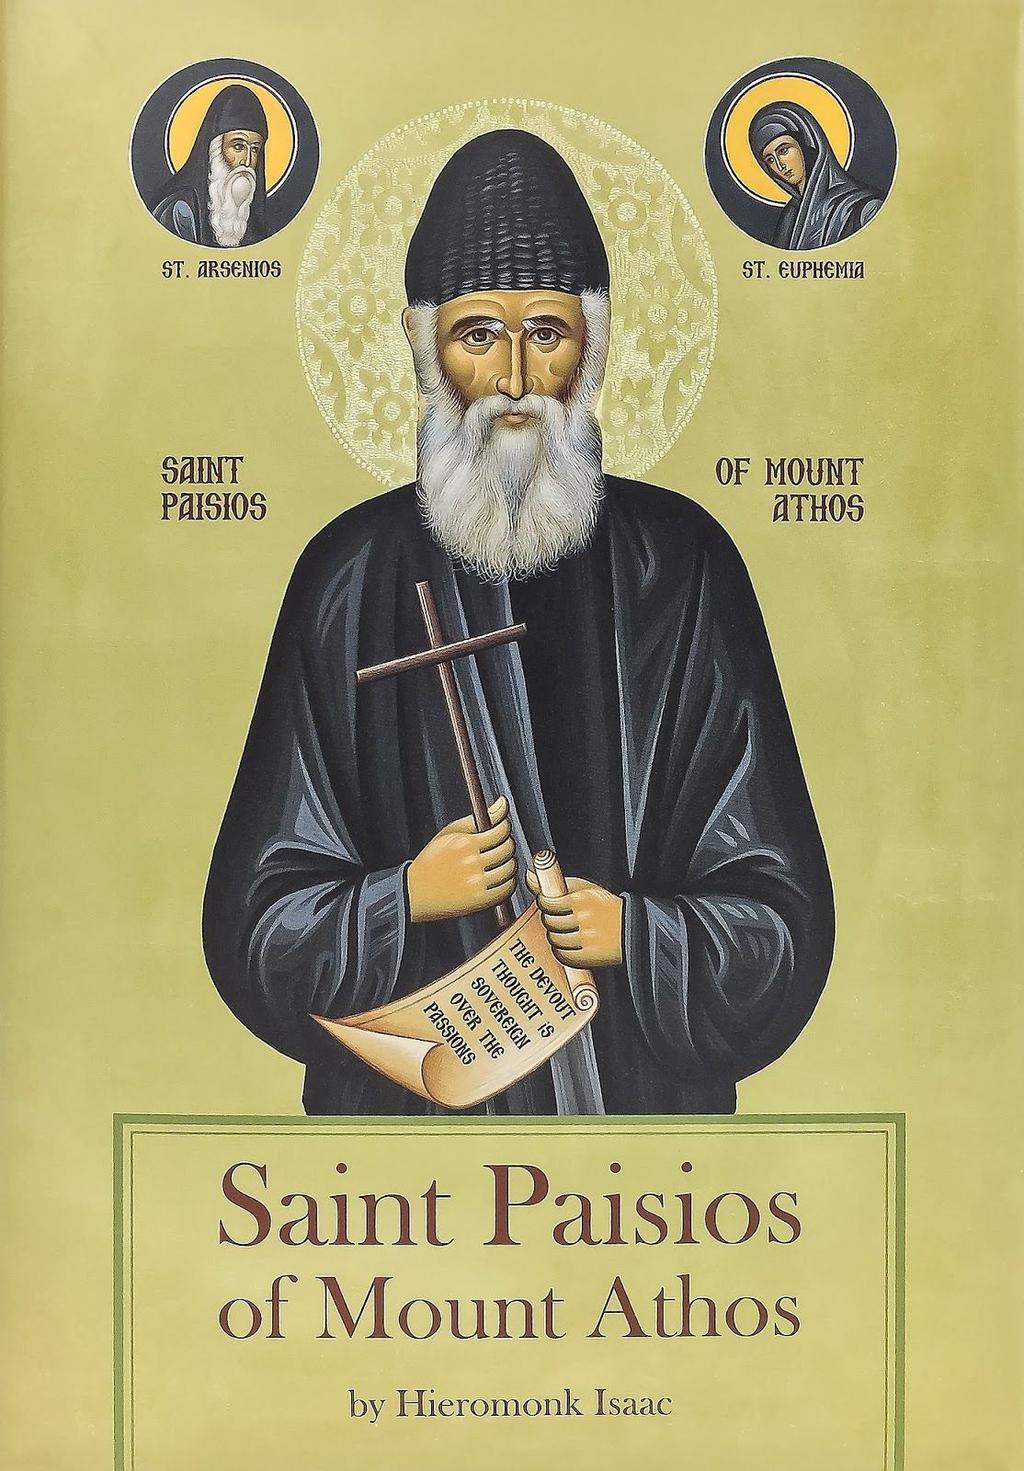 Vladimir Seminary Press (the publisher), The first part of this book is a remarkable account of St. Silouan s life, personality and teaching by his spiritual disciple Archimandrite Sophrony.